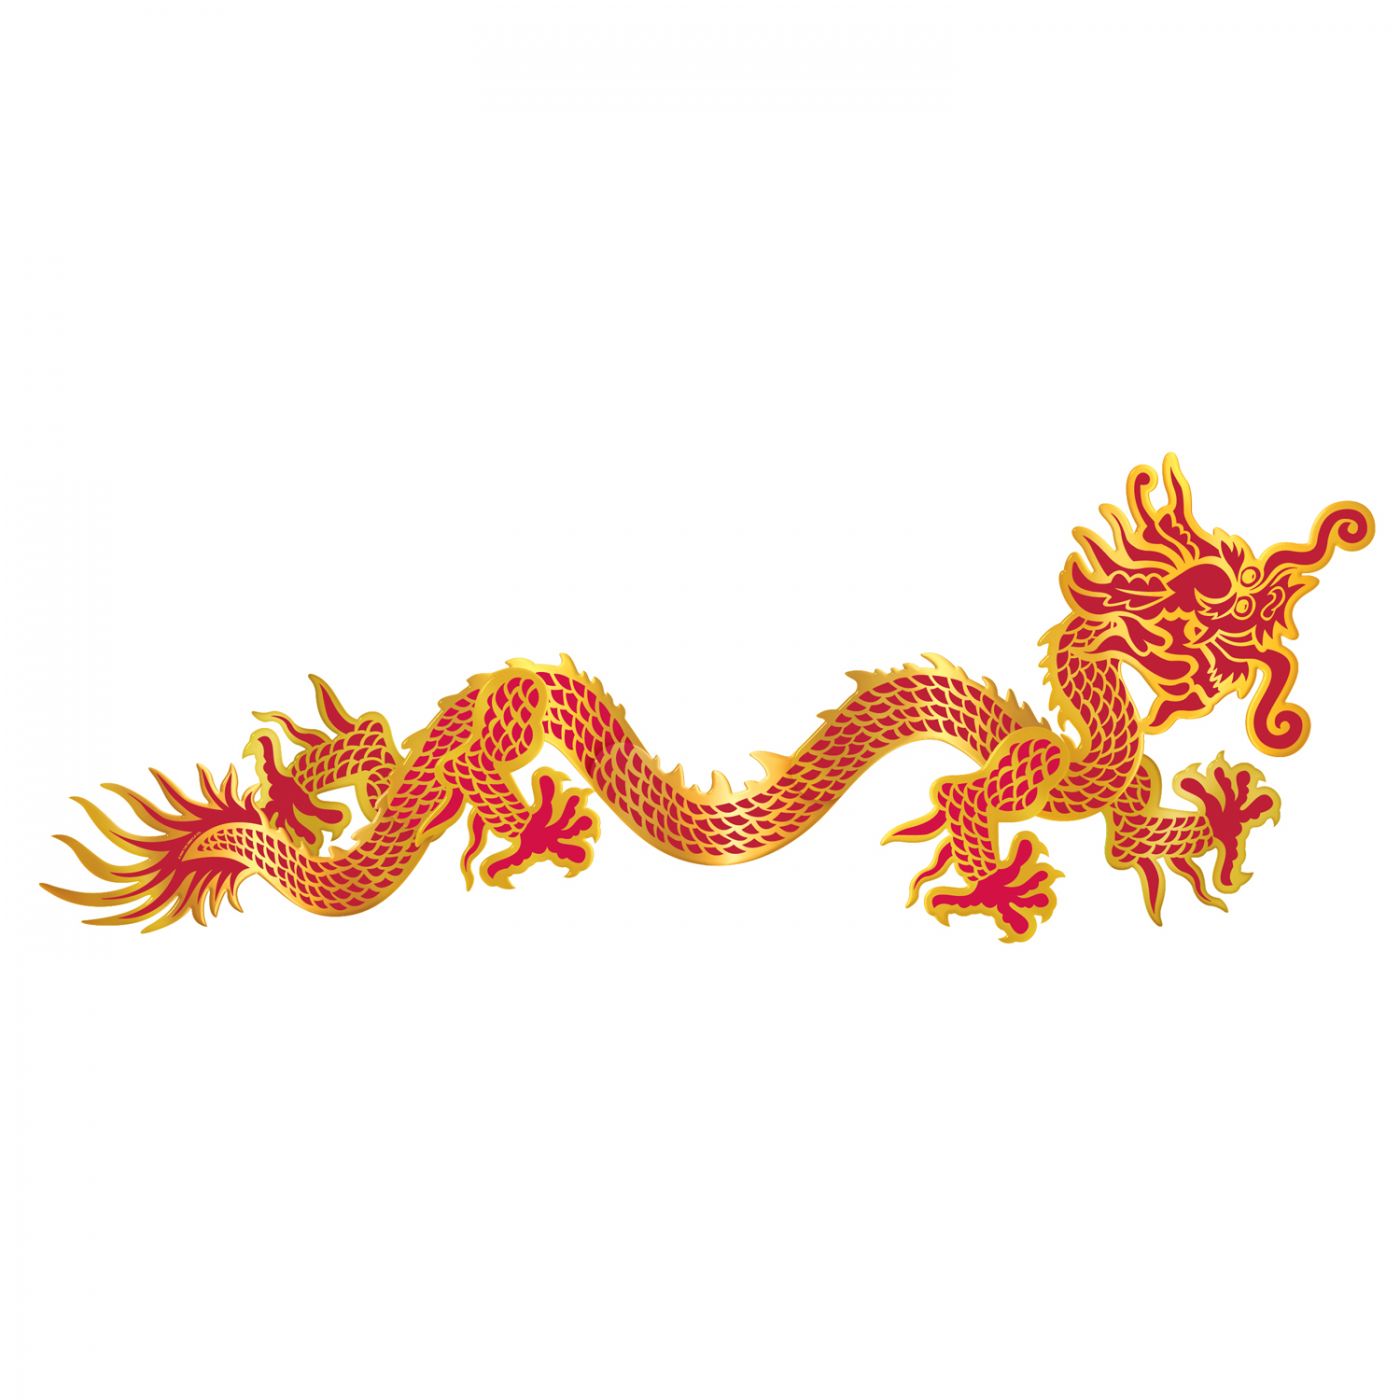 Jointed Dragon (12) image